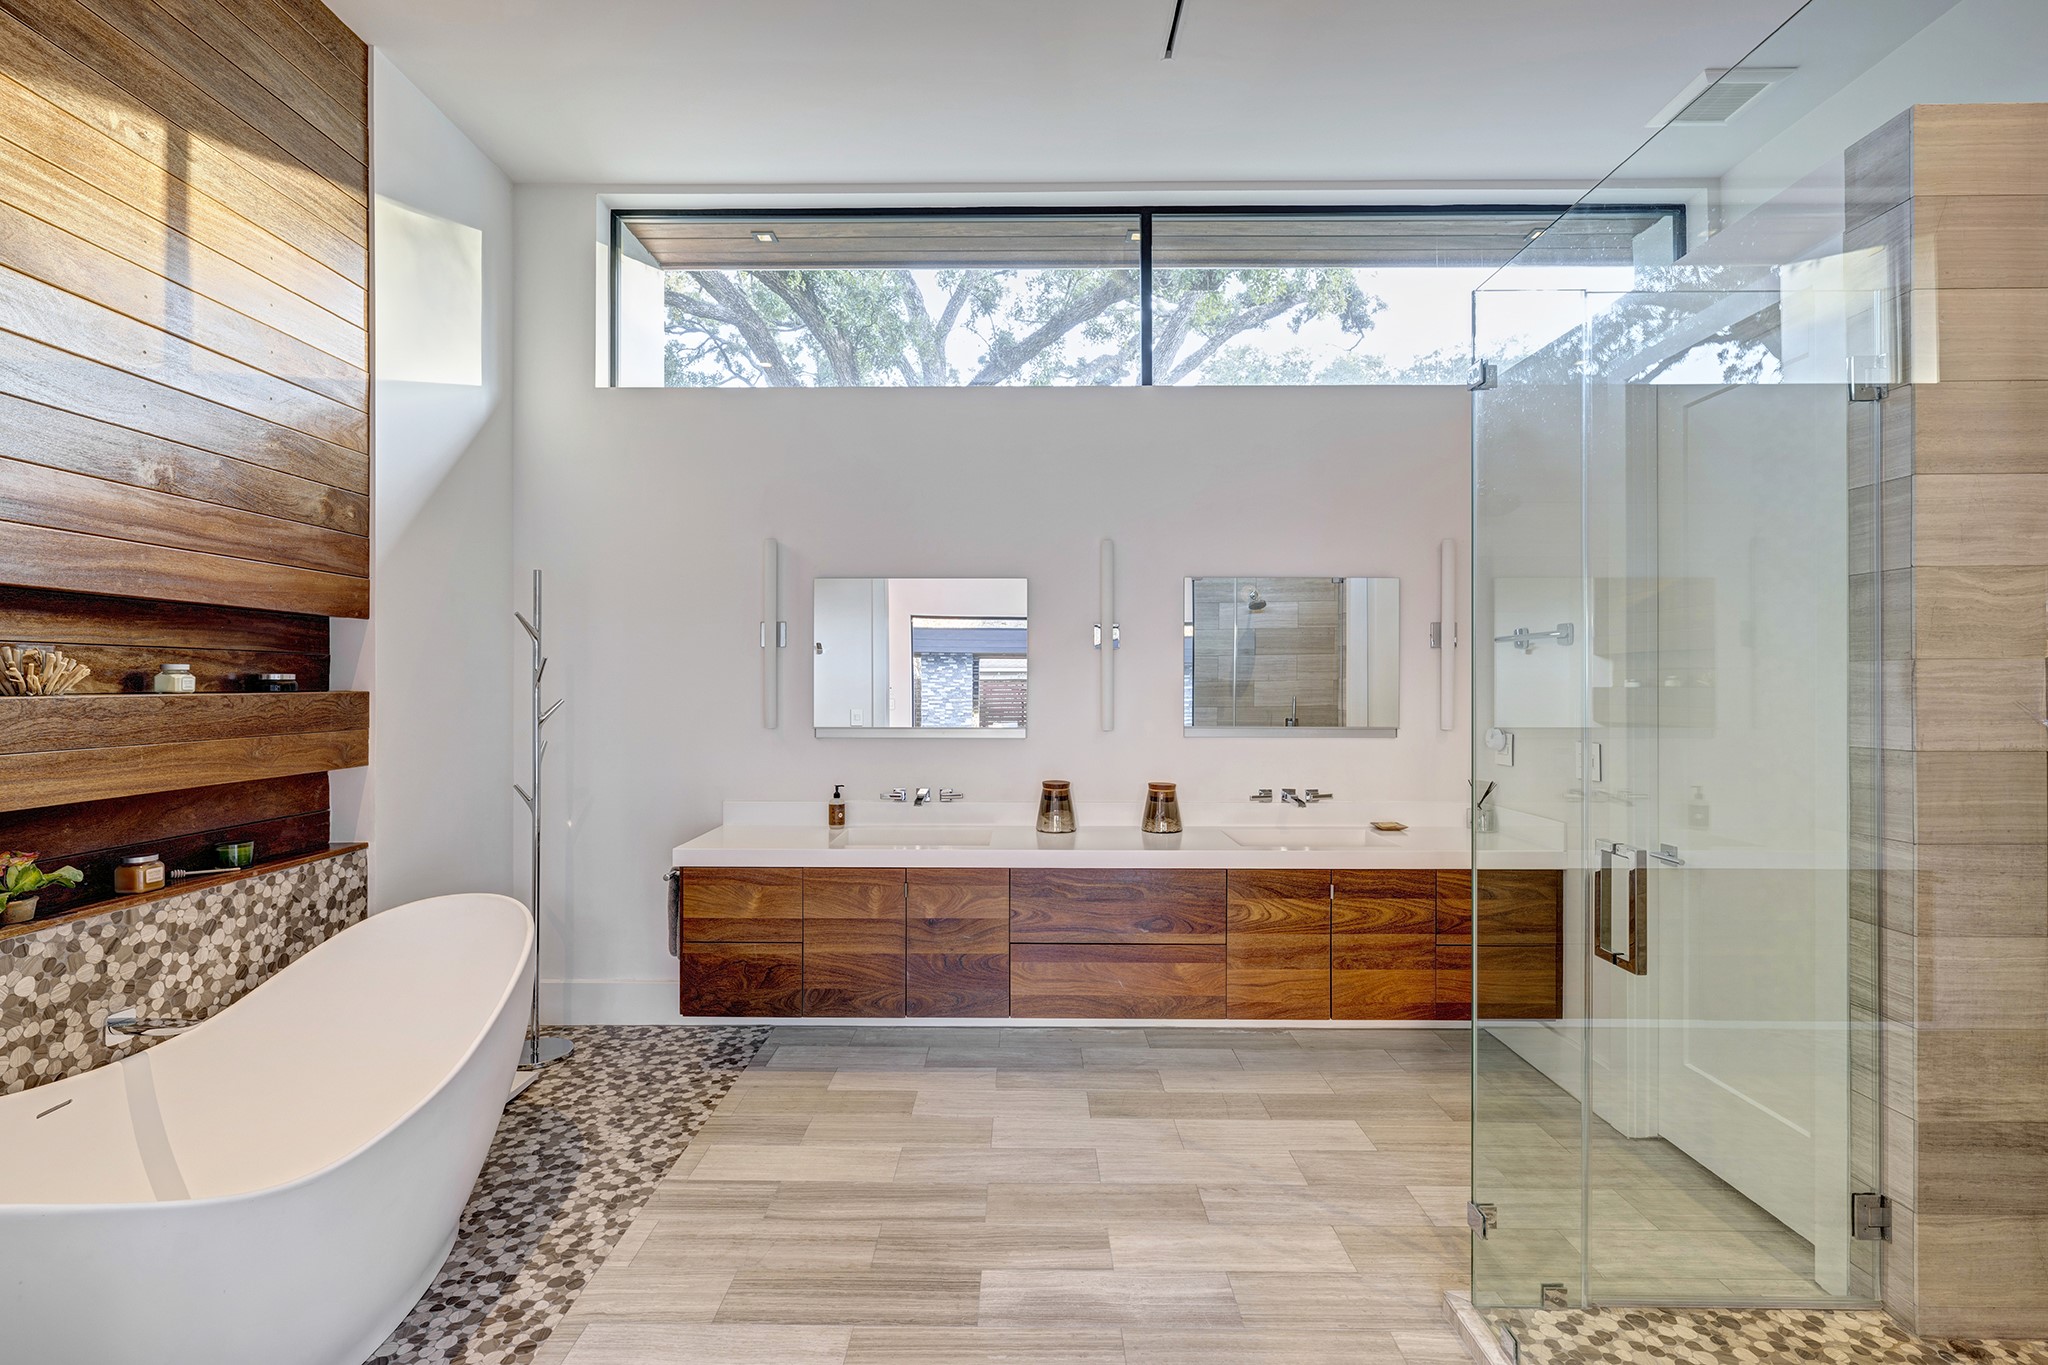 Luxurious primary bathroom is a spa-like feel with soaking tub, dual sinks and walk-in shower.